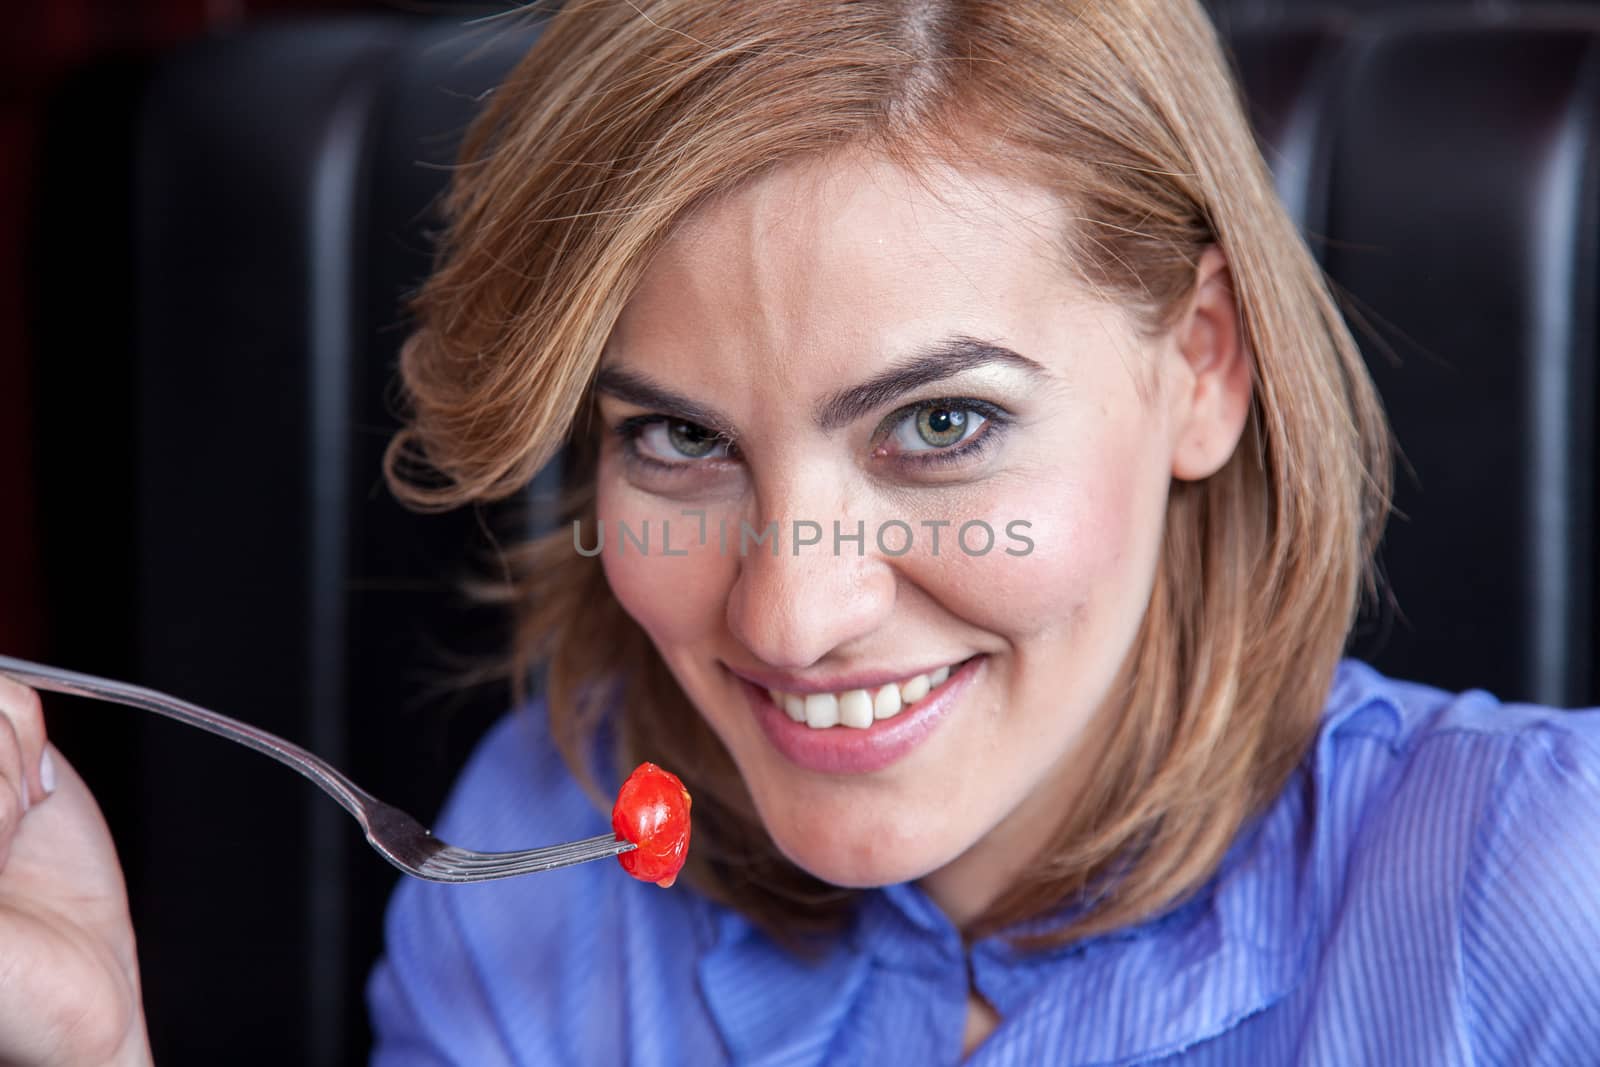 Woman is eating cherry